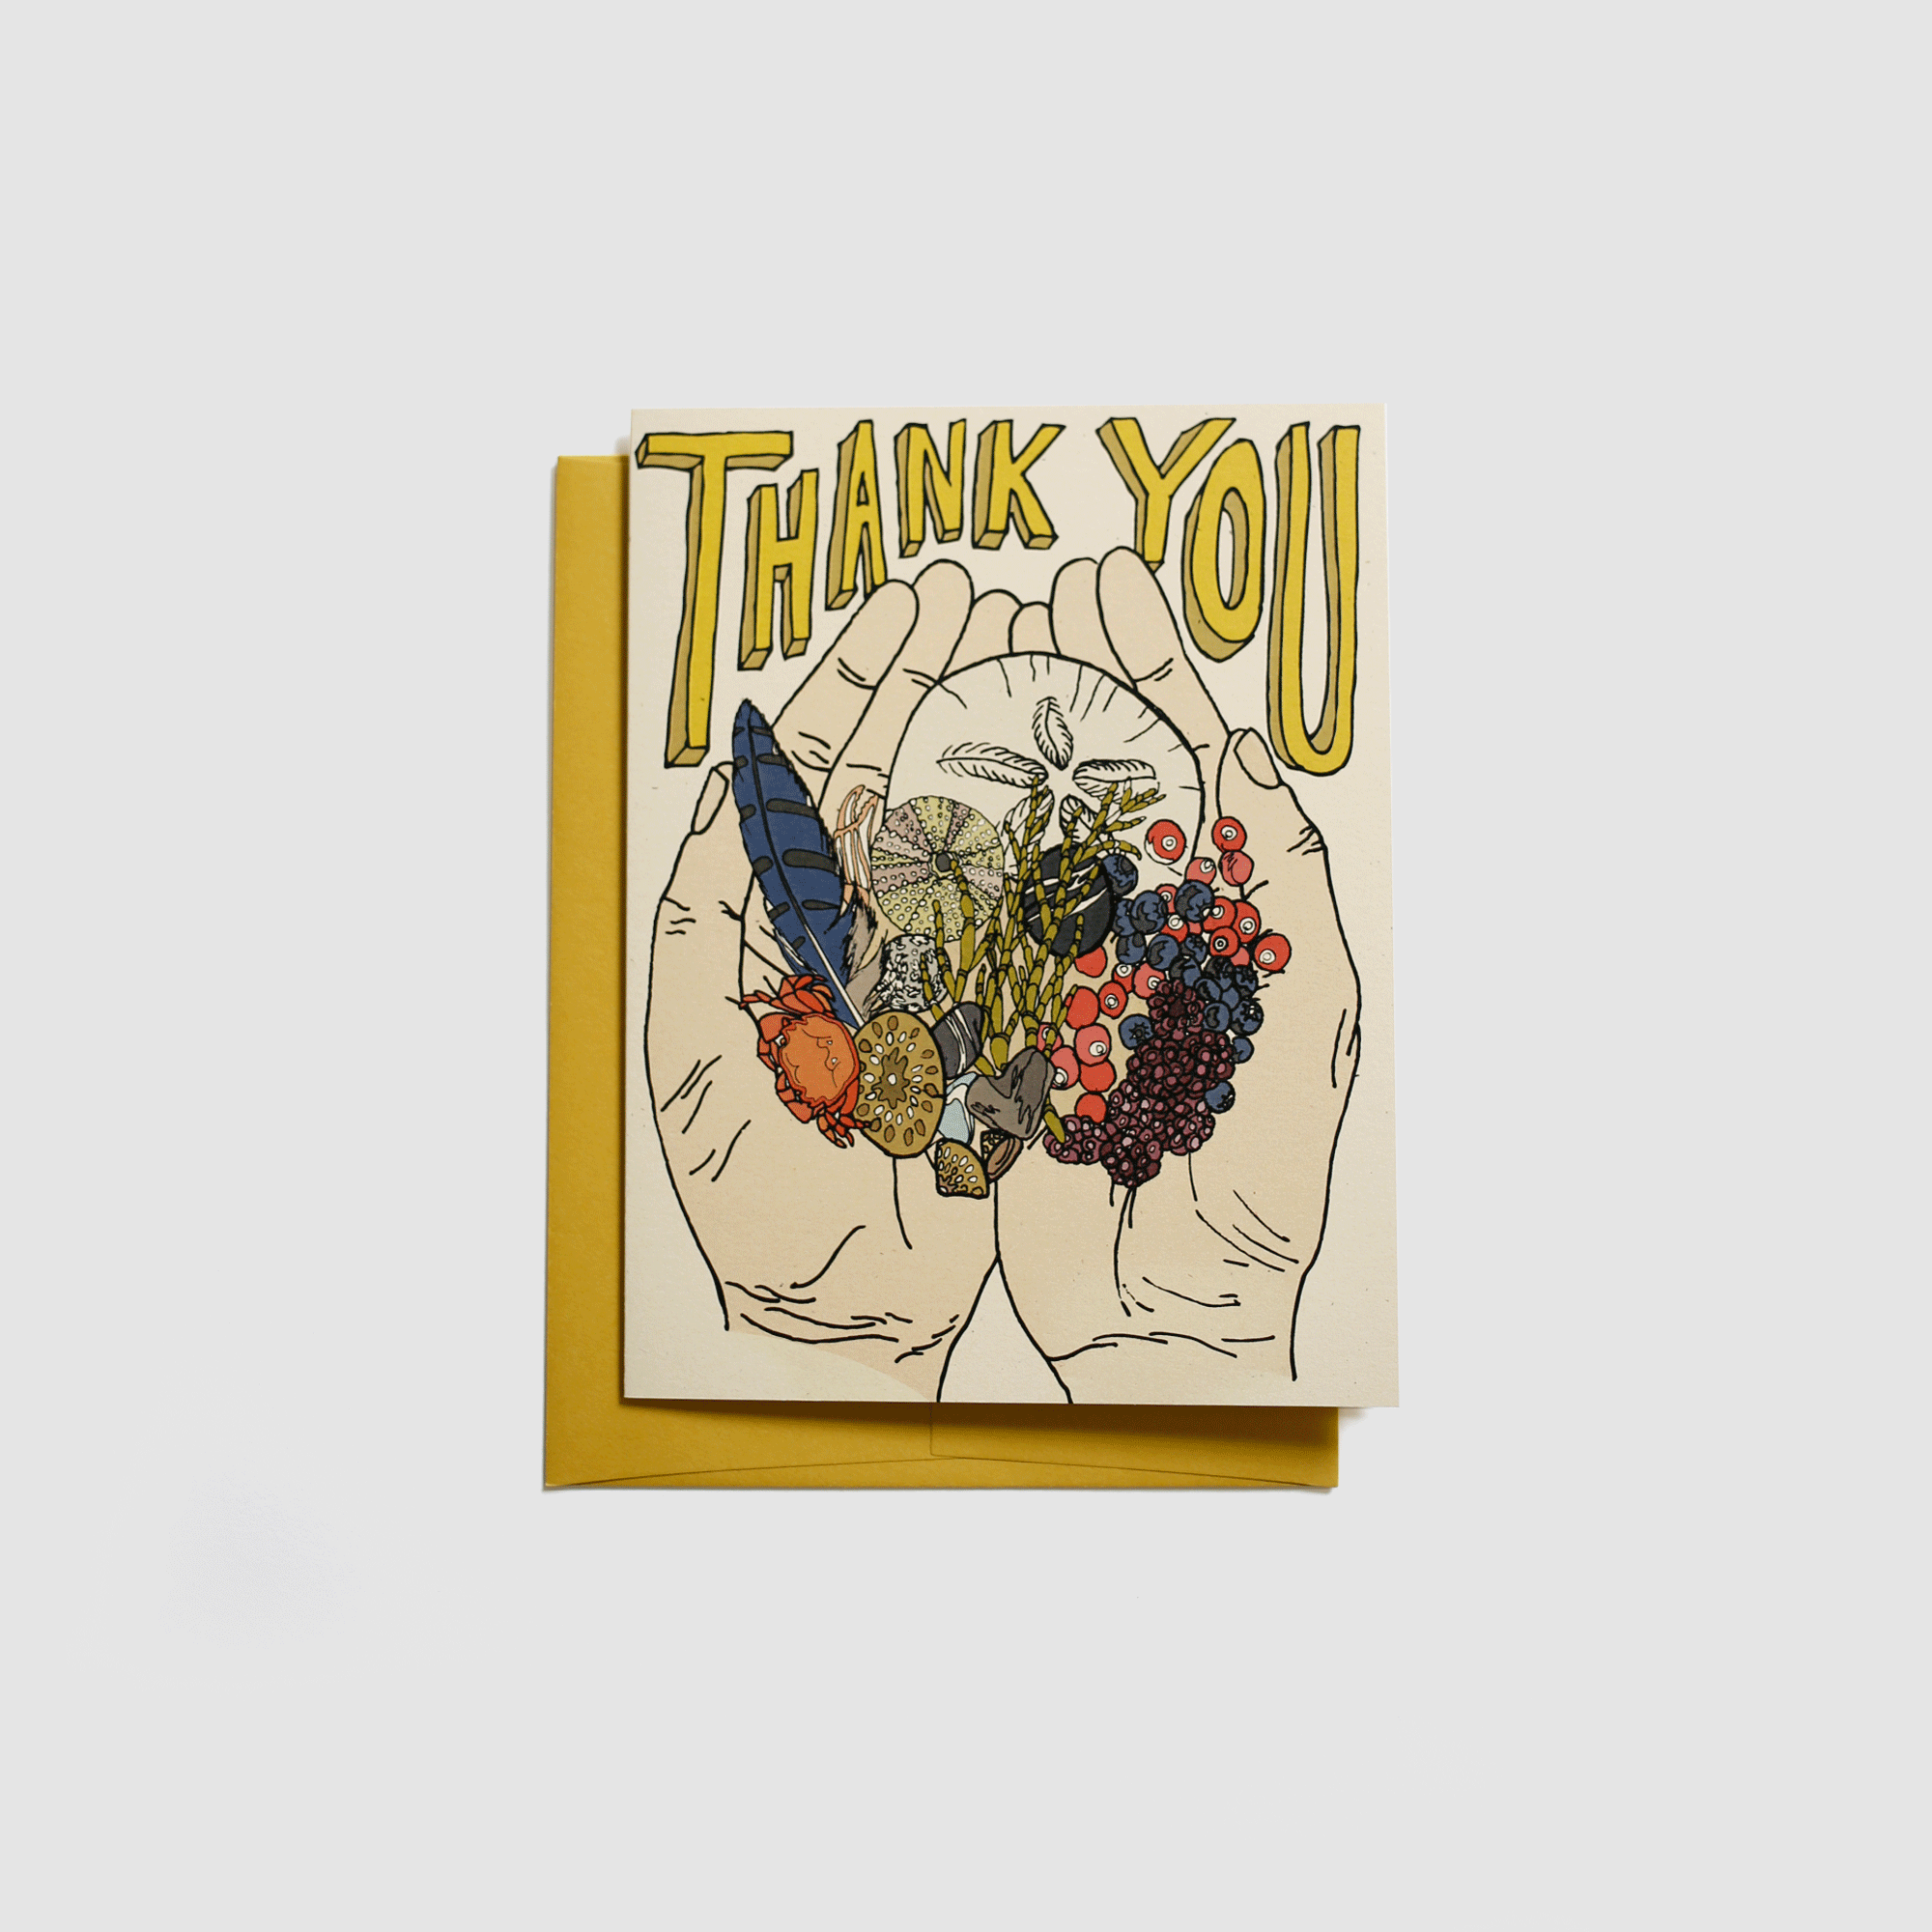 Thank You Card - Wild Life Illustration and Card Co.